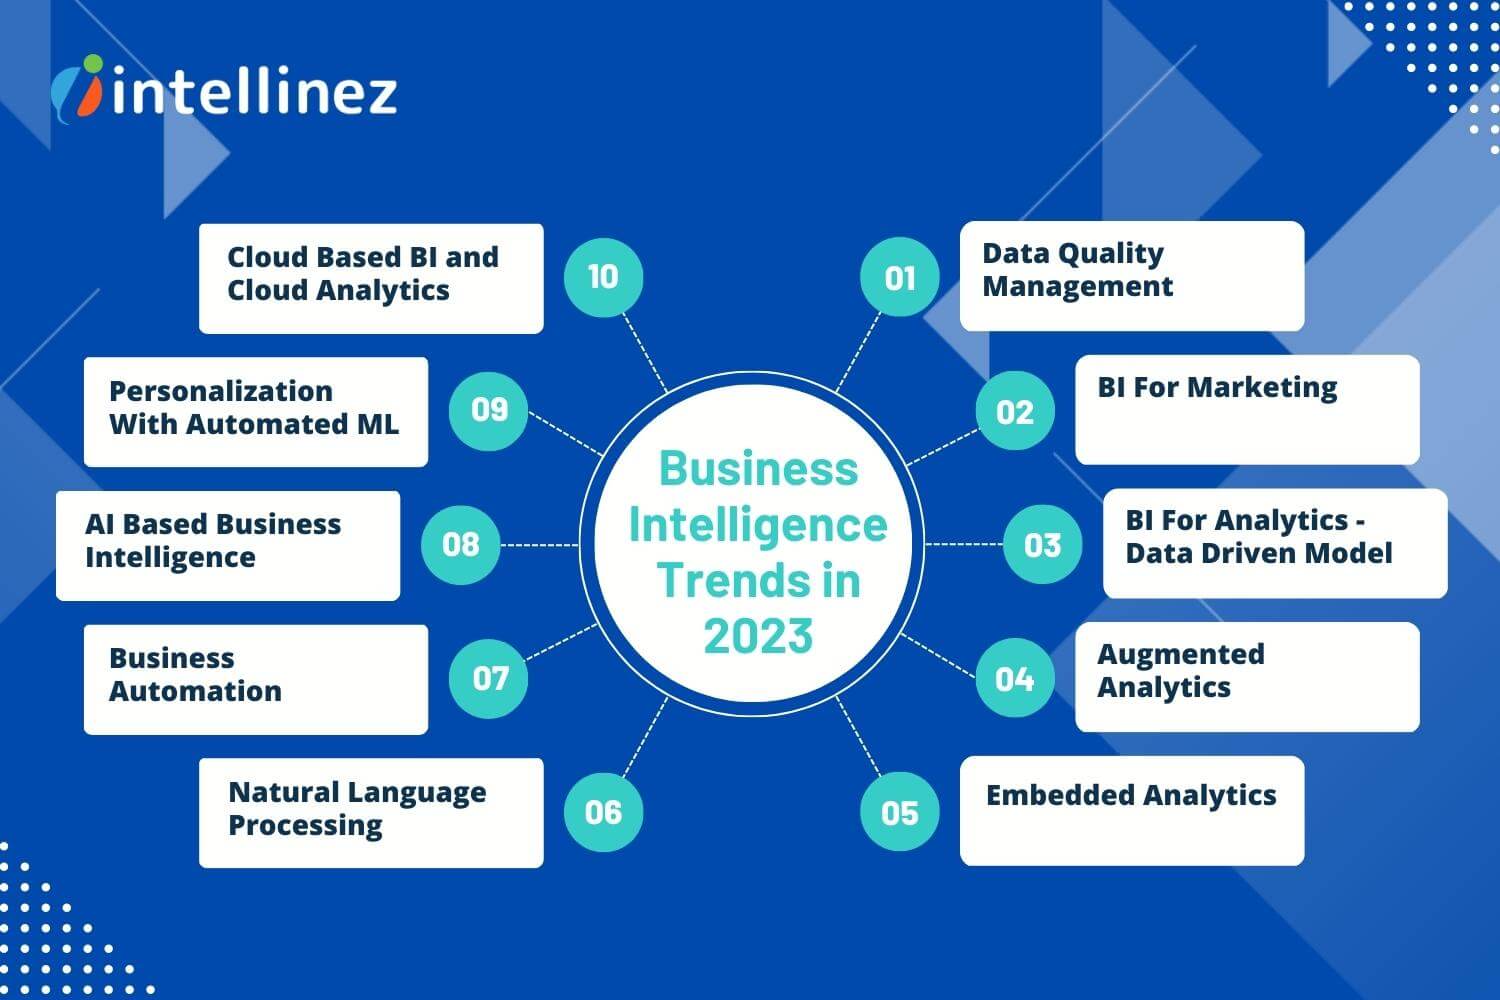 Recent Business Intelligence Trends for 2023